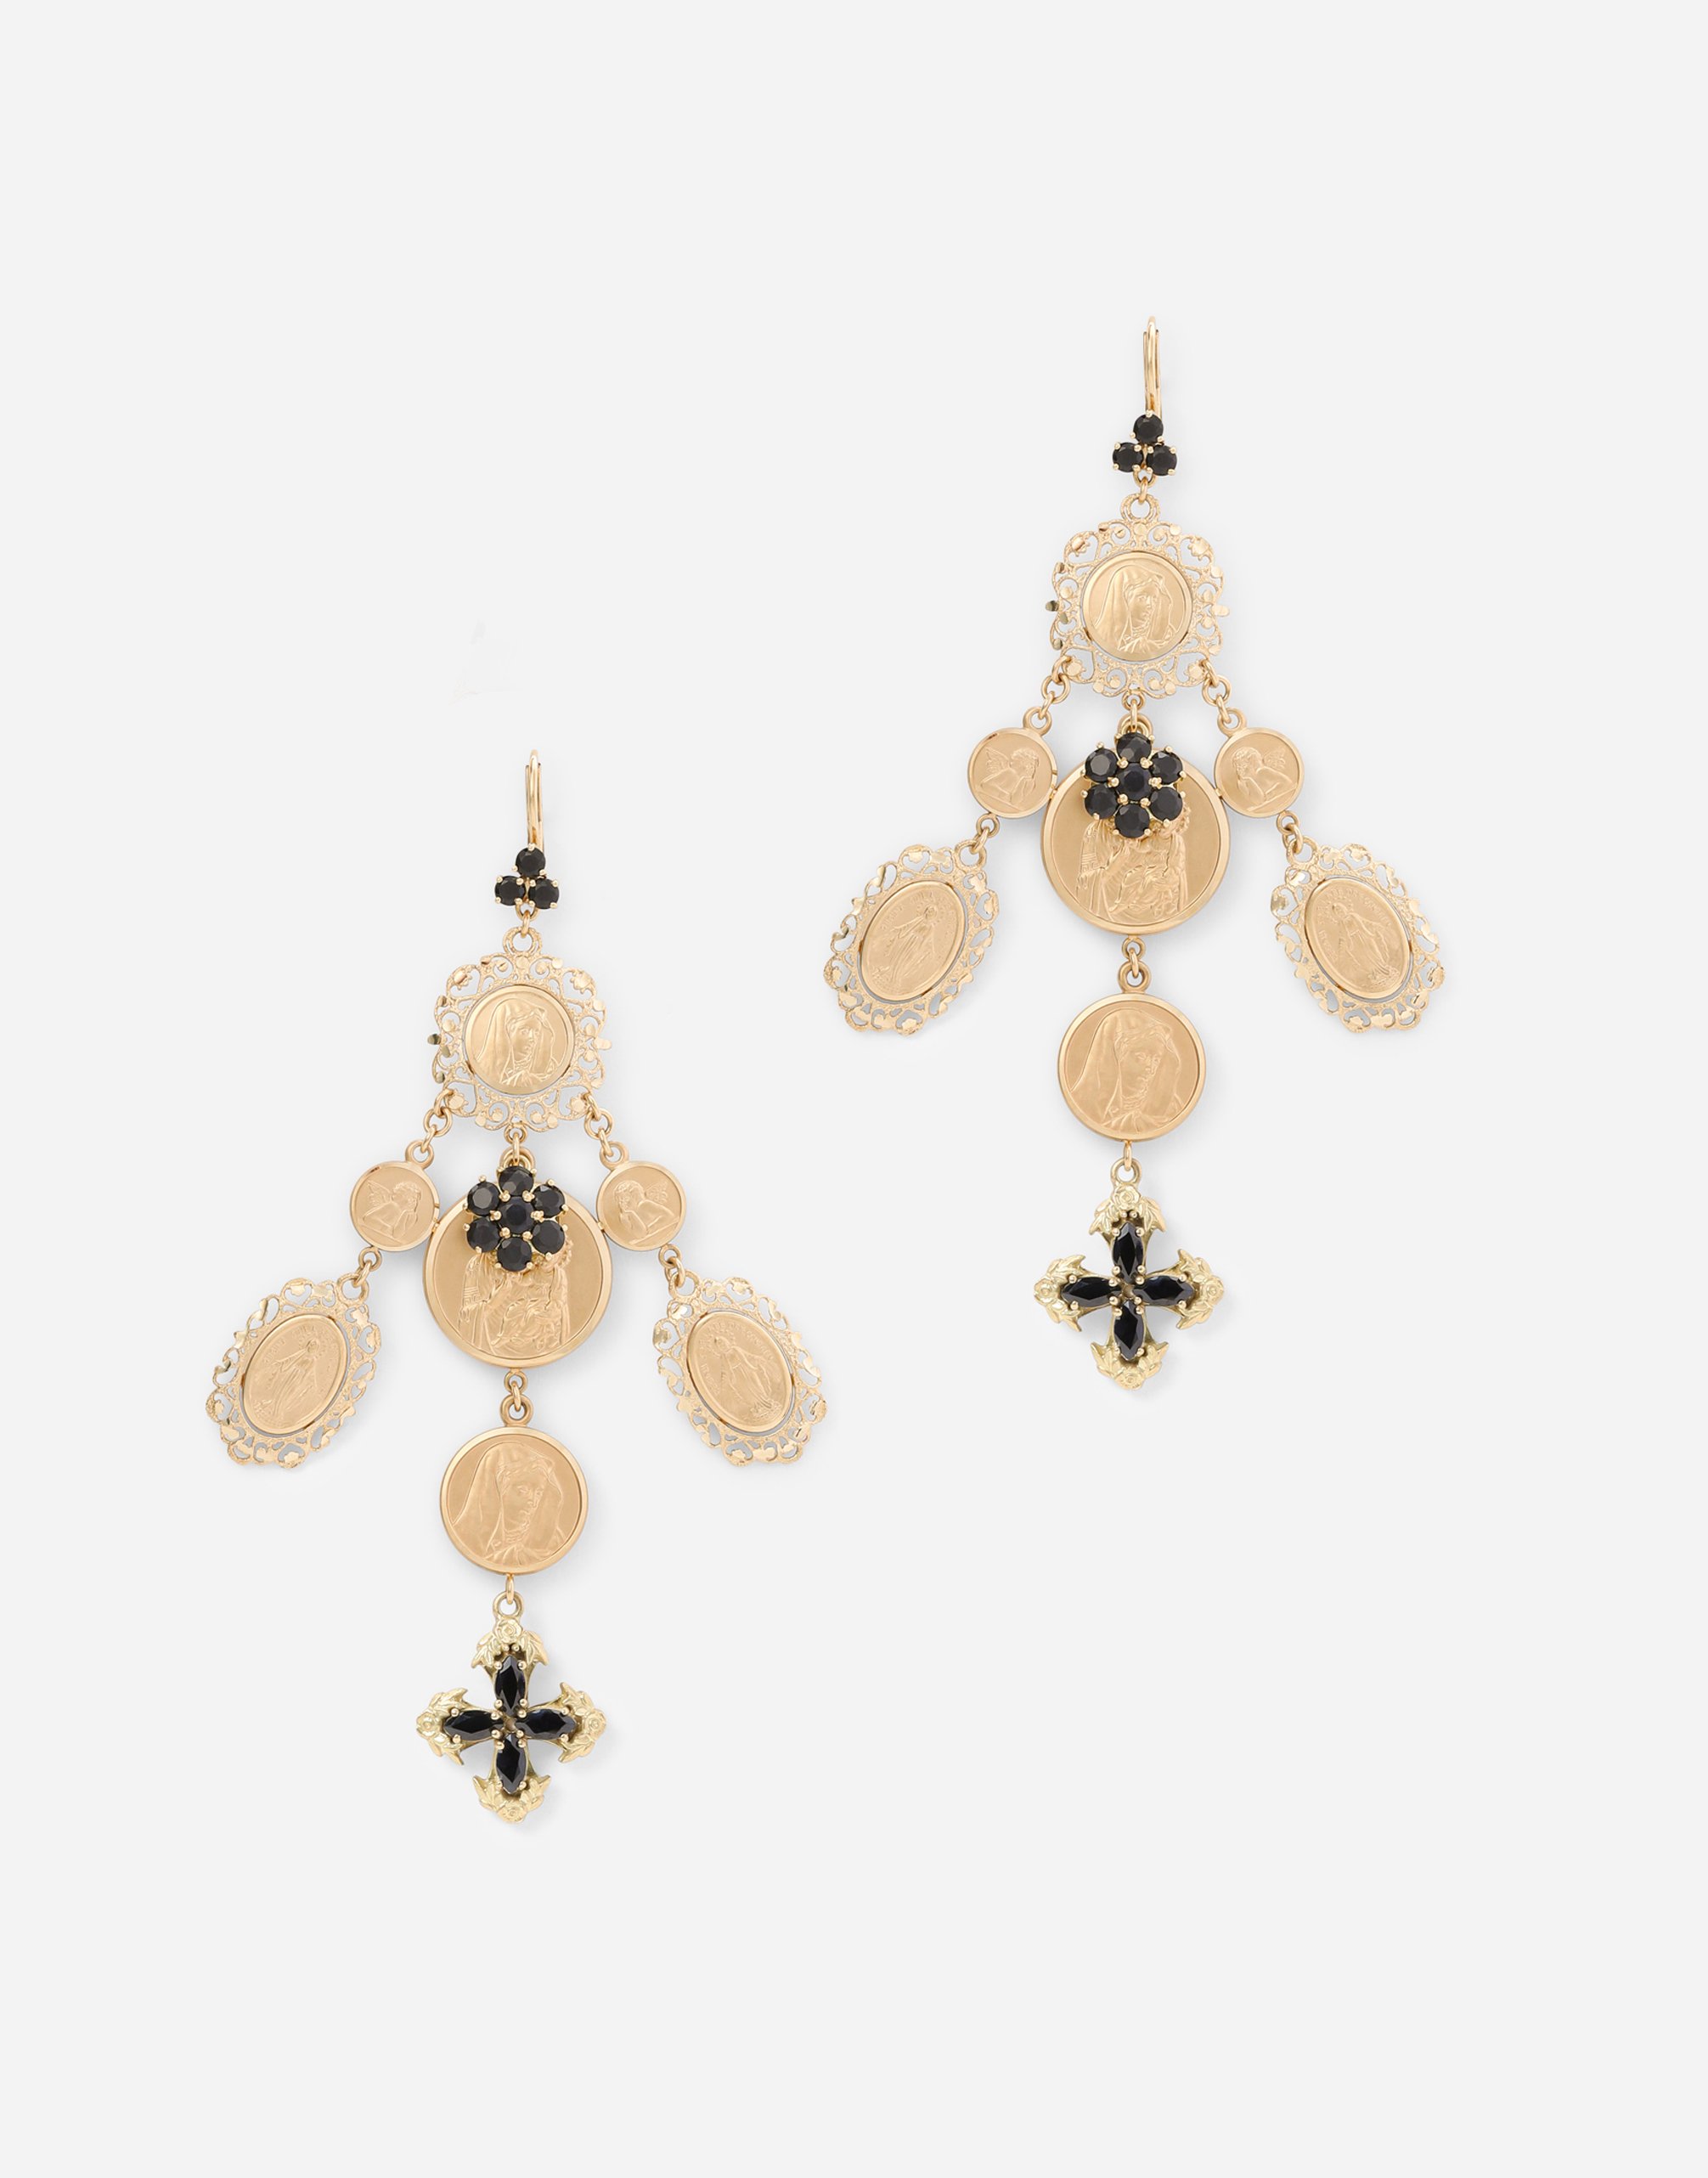 Yellow gold Sicily earrings with medals and cross pendants in Gold